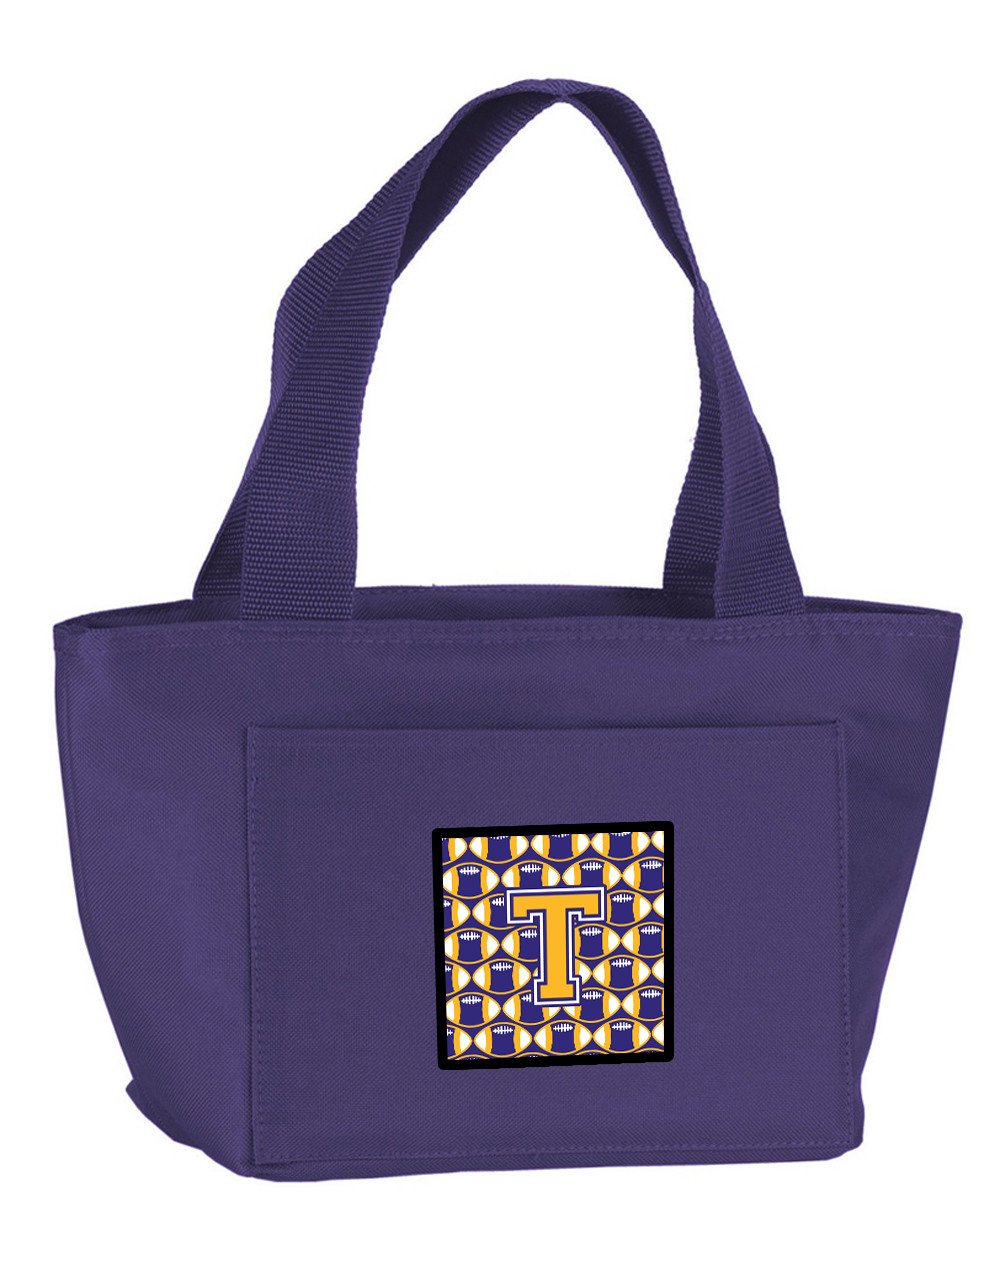 Letter T Football Purple and Gold Lunch Bag CJ1064-TPR-8808 by Caroline's Treasures